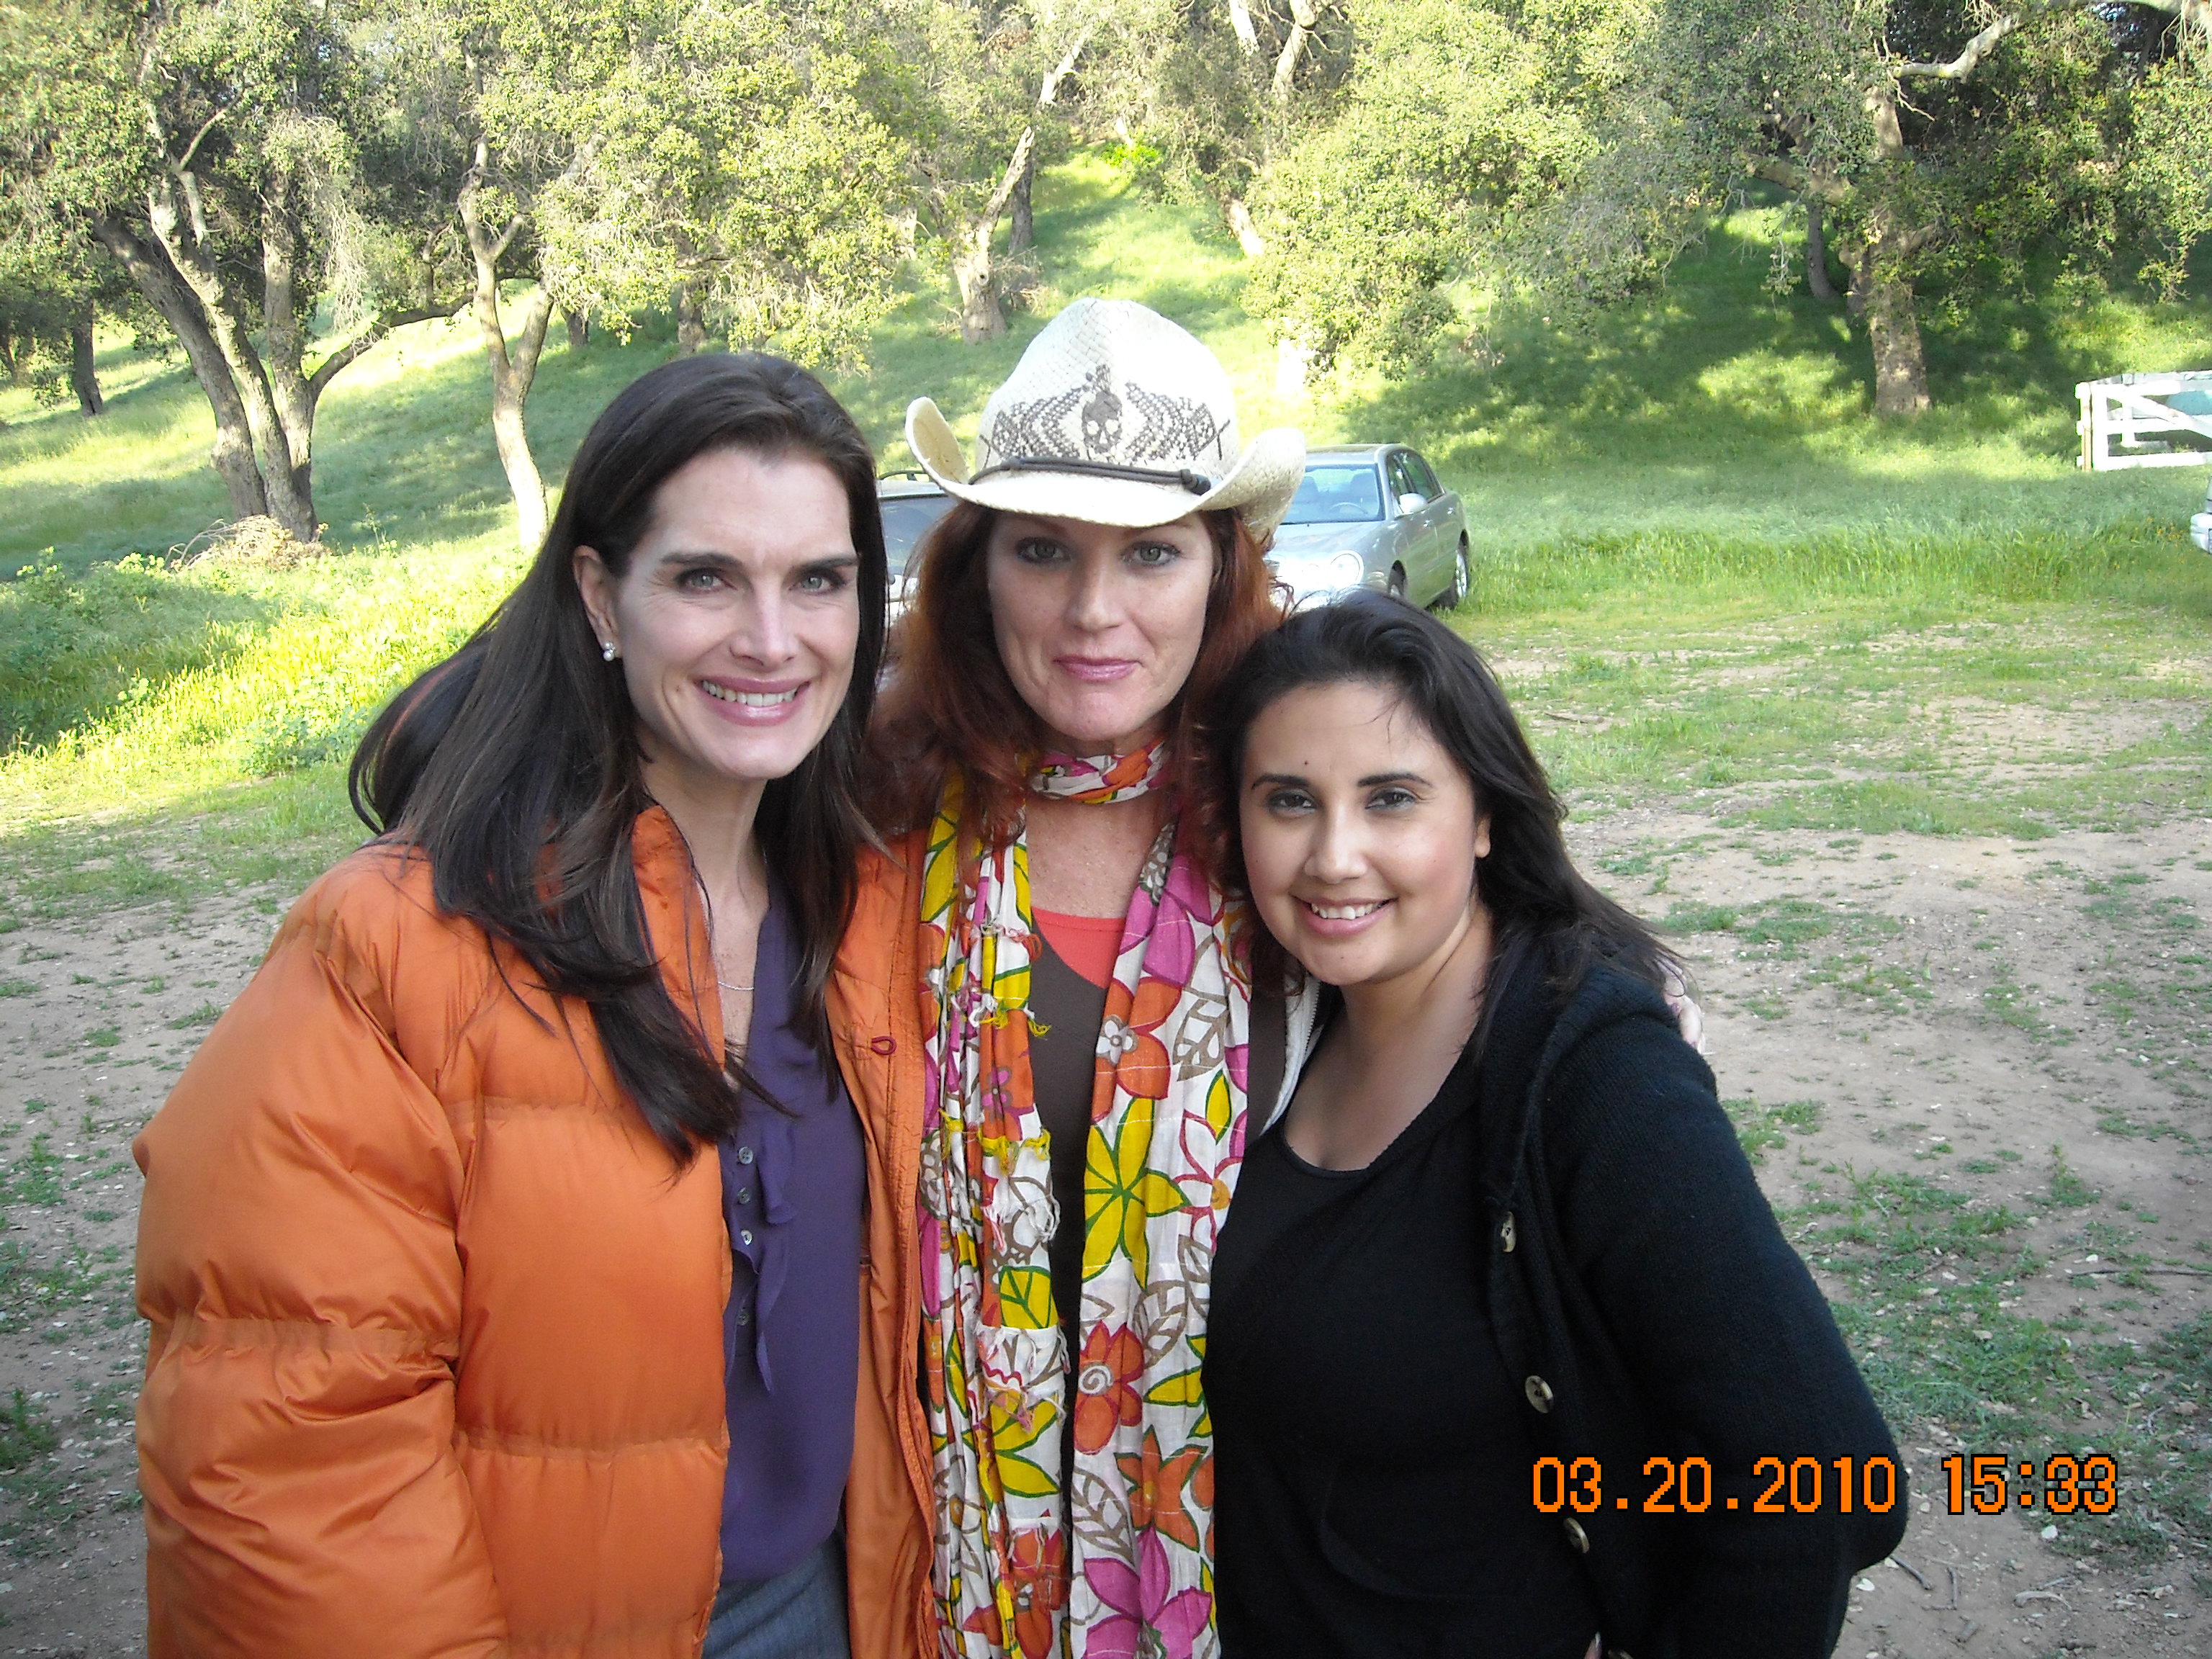 with Brooke Shields